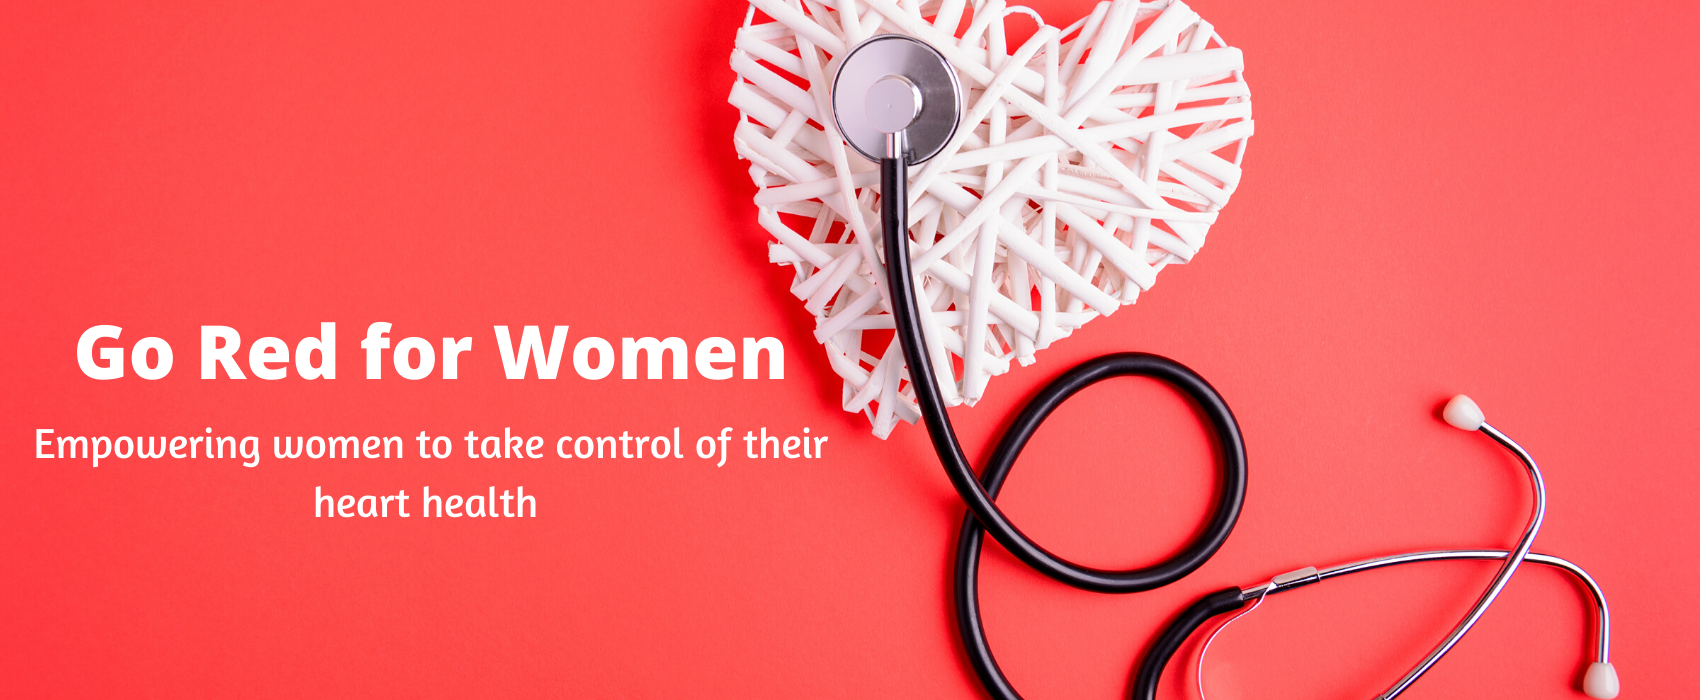 February is Go Red for Women Month, the American Heart Association’s